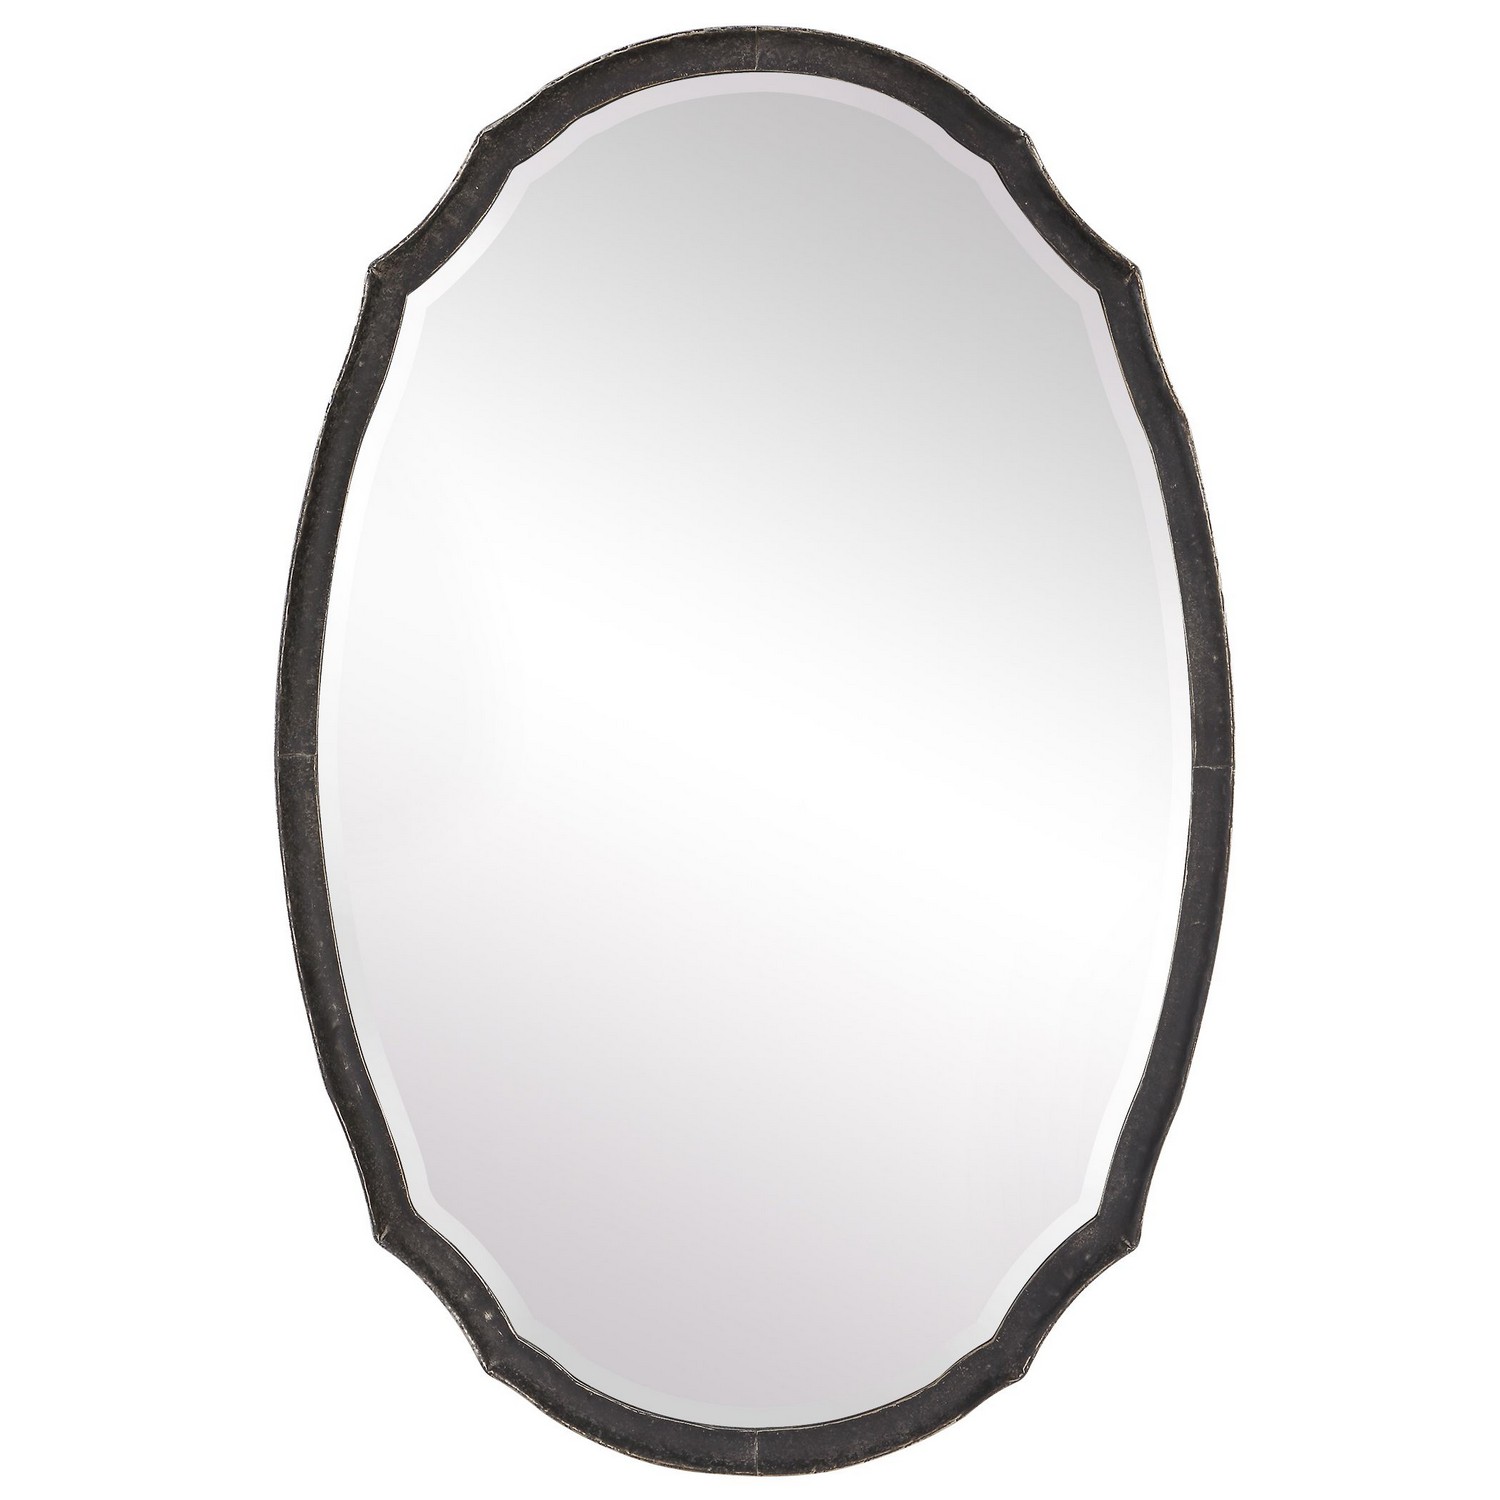 ABC Accent ABC-00526 Mirror - Distressed Charcoal